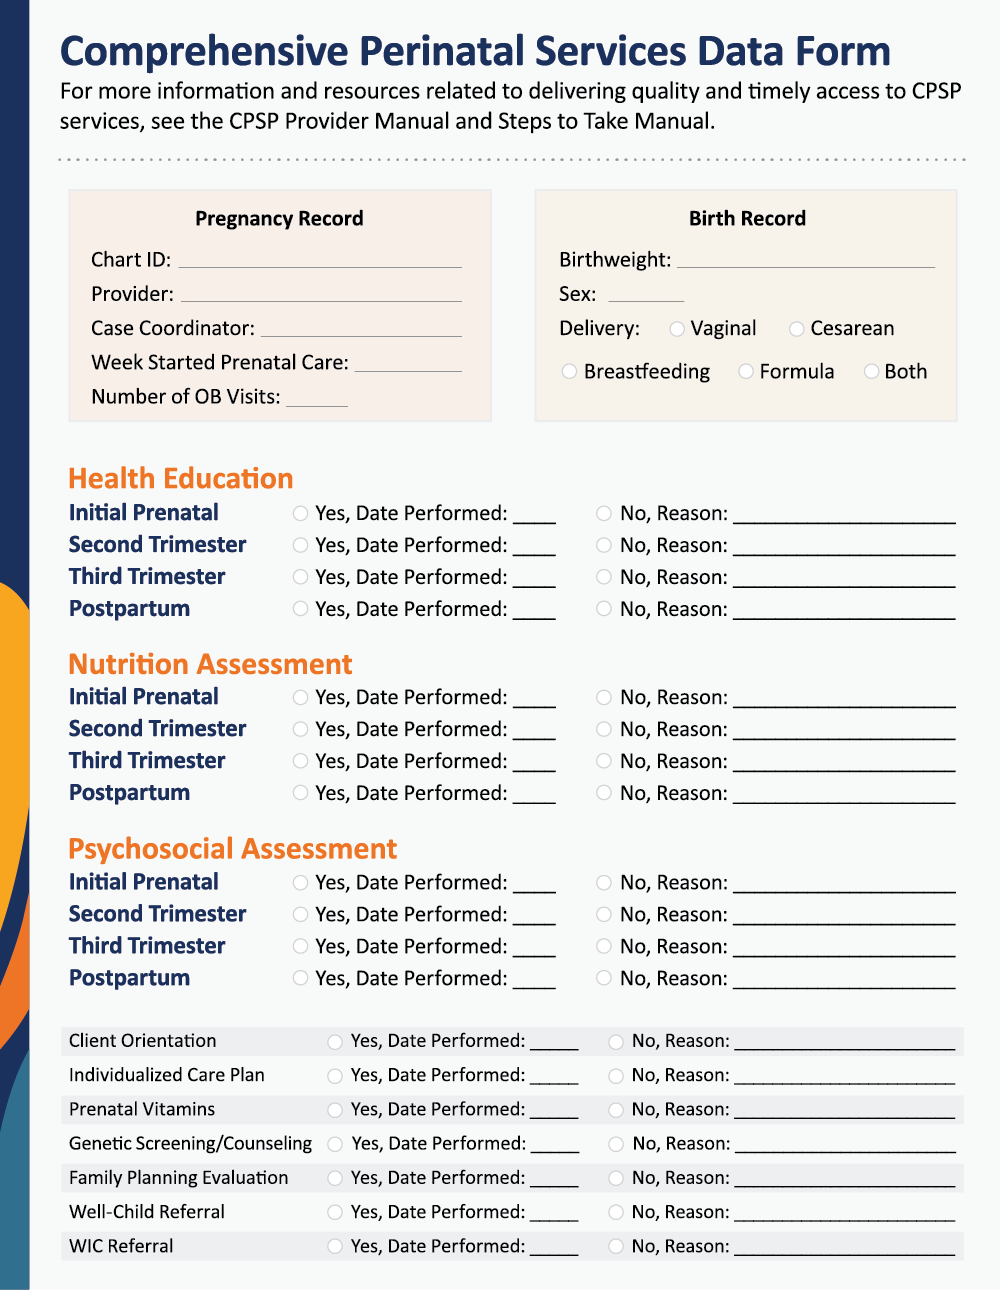 A sample form that would evaluate whether a member received program services, including Health Education, Nutrition, and Psychosocial Assessments